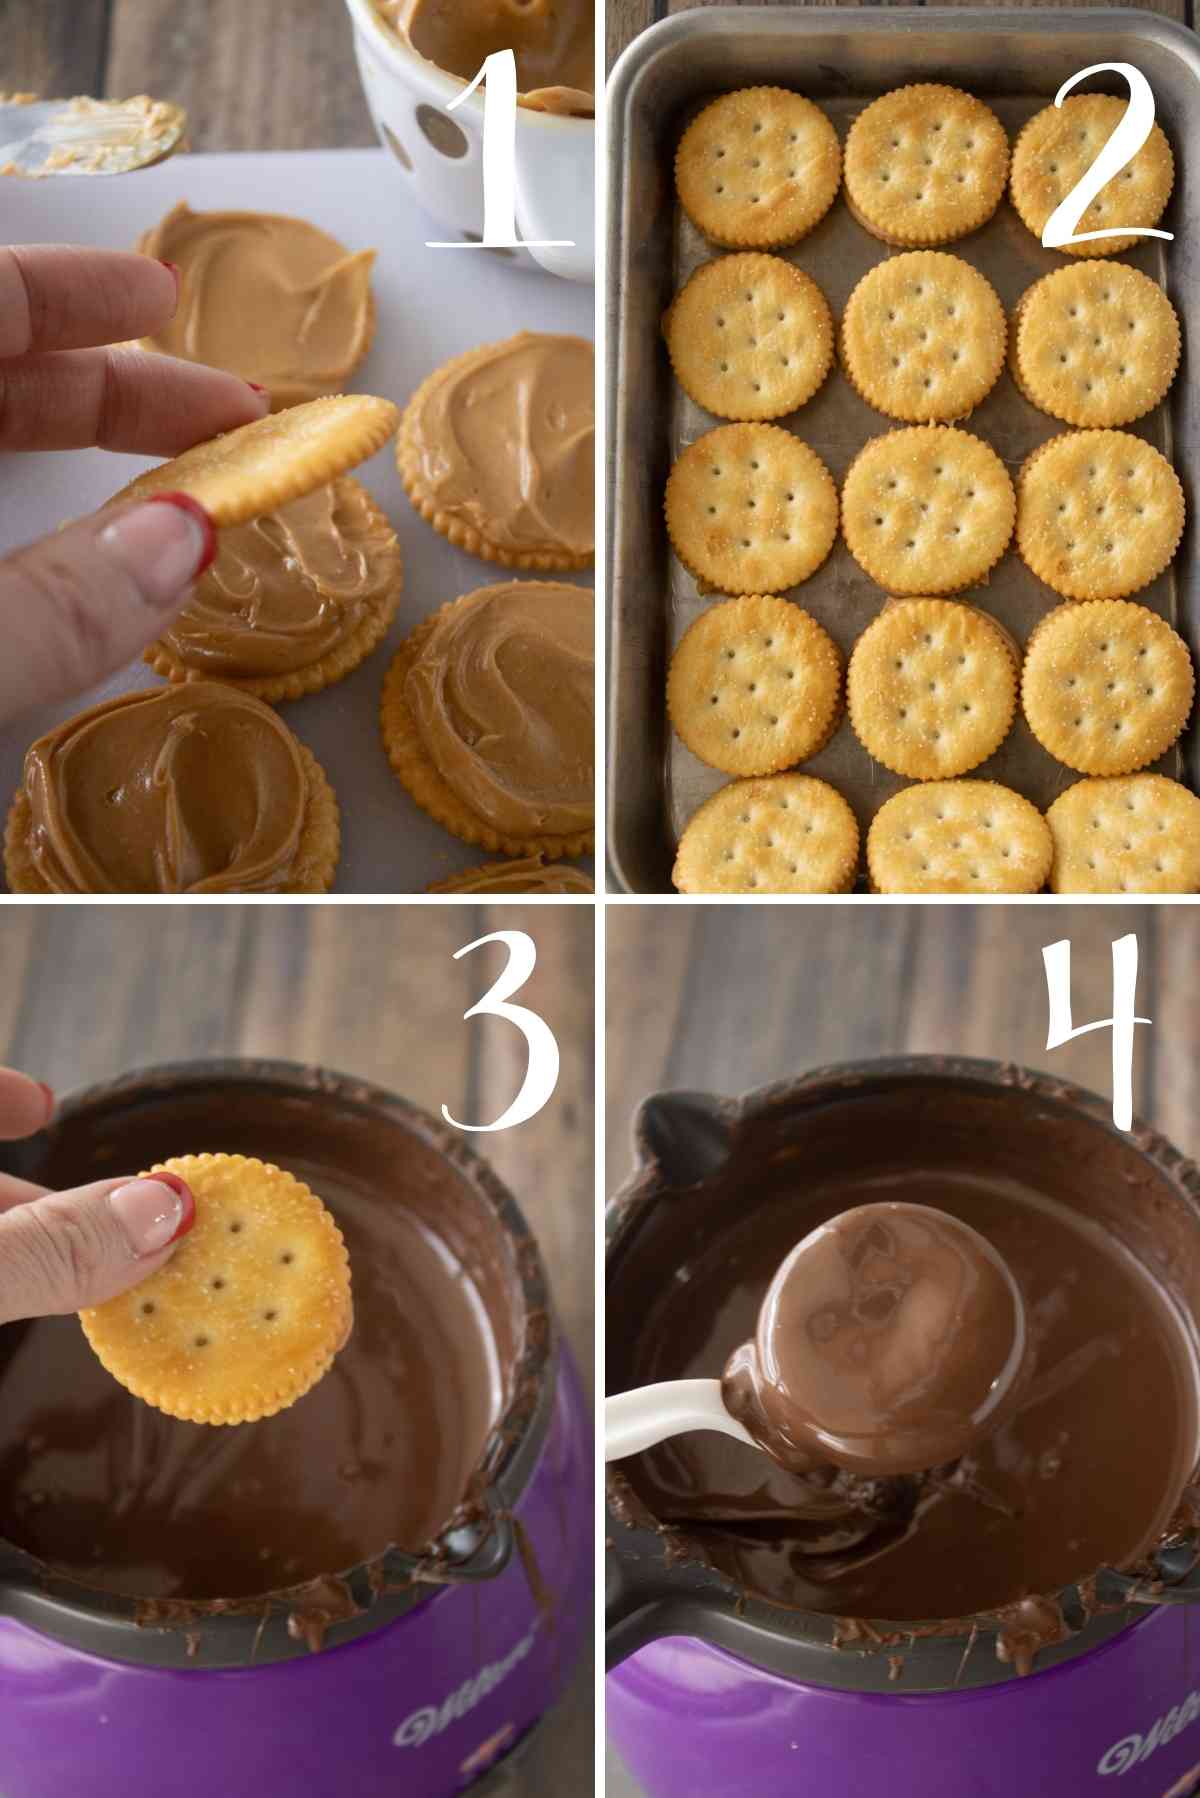 Peanut butter filling in the center of each cracker sandwich dipped in rich chocolate!